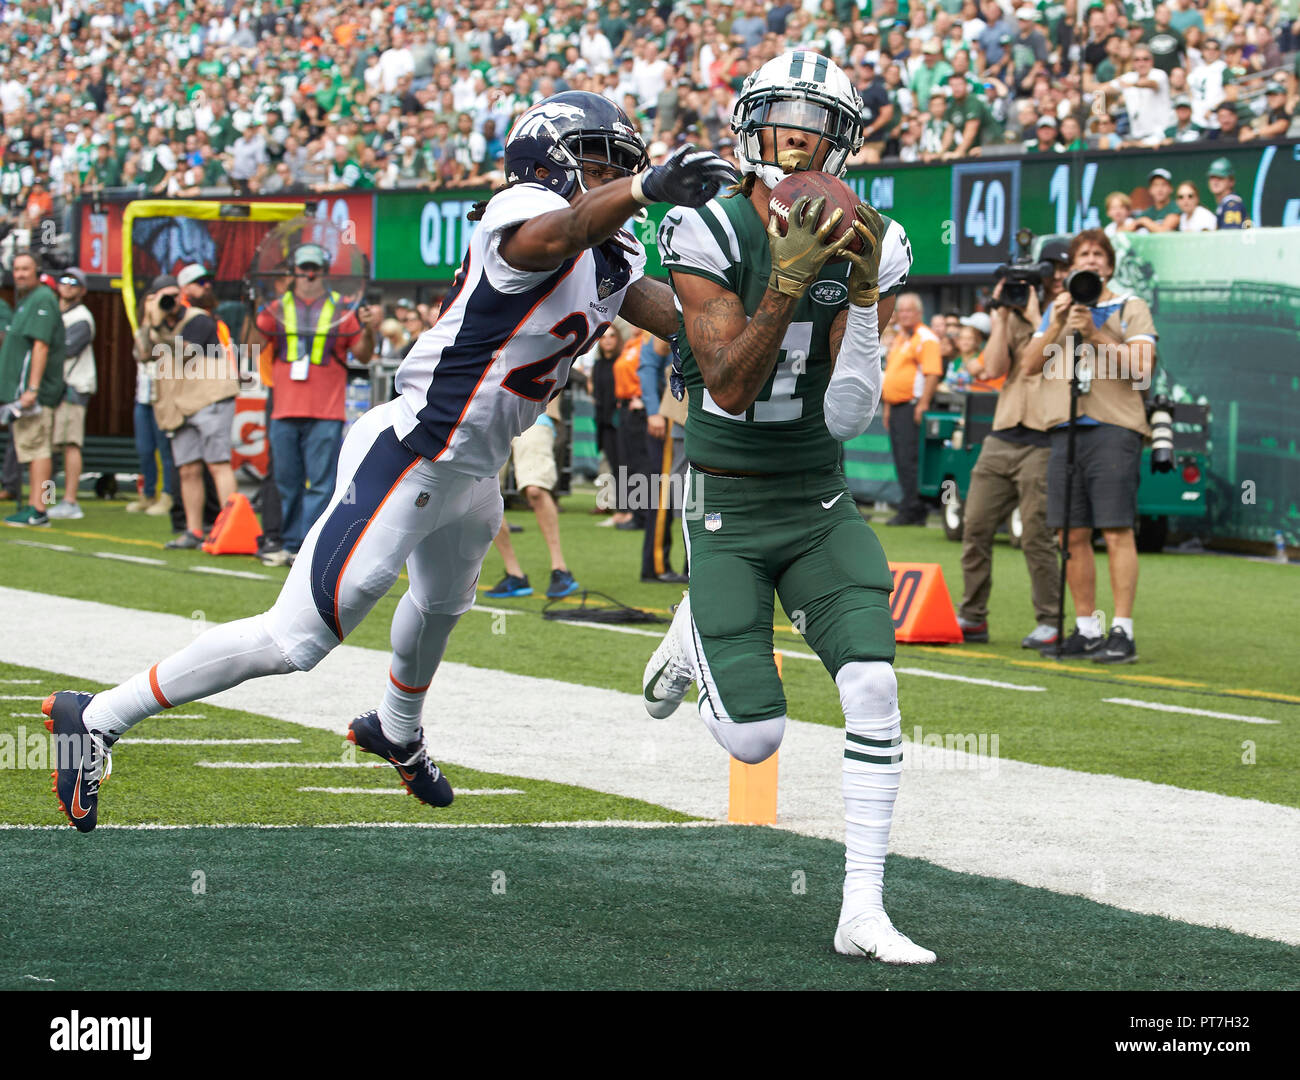 East Rutherford, New Jersey, USA. 7th Oct, 2018. New York Jets wide receiver Robby Anderson (11) catches his second touchdown of the game in the first half as Denver Broncos cornerback Bradley Roby (29) tries to defend during a NFL game between the Denver Broncos and the New York Jets at MetLife Stadium in East Rutherford, New Jersey. Duncan Williams/CSM/Alamy Live News Stock Photo